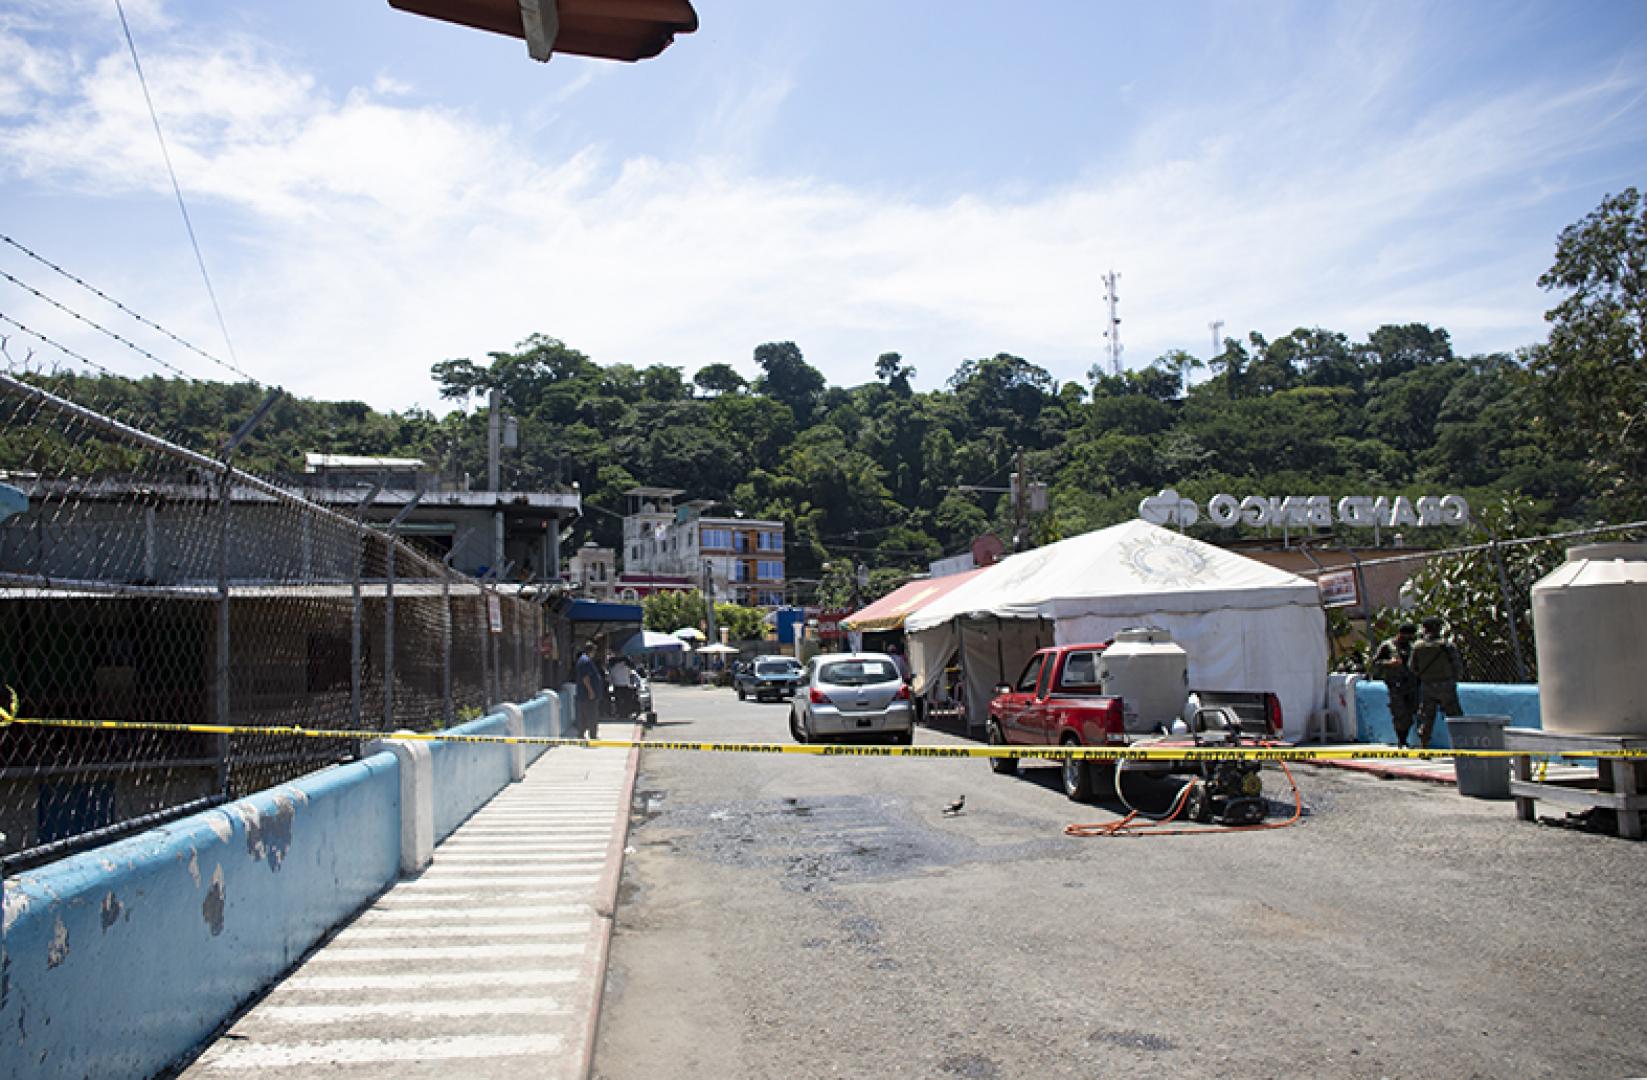 Guatemalan soldiers guard the border crossing, only allowing their citizens to enter after going through an interrogation and disinfecting their cars.